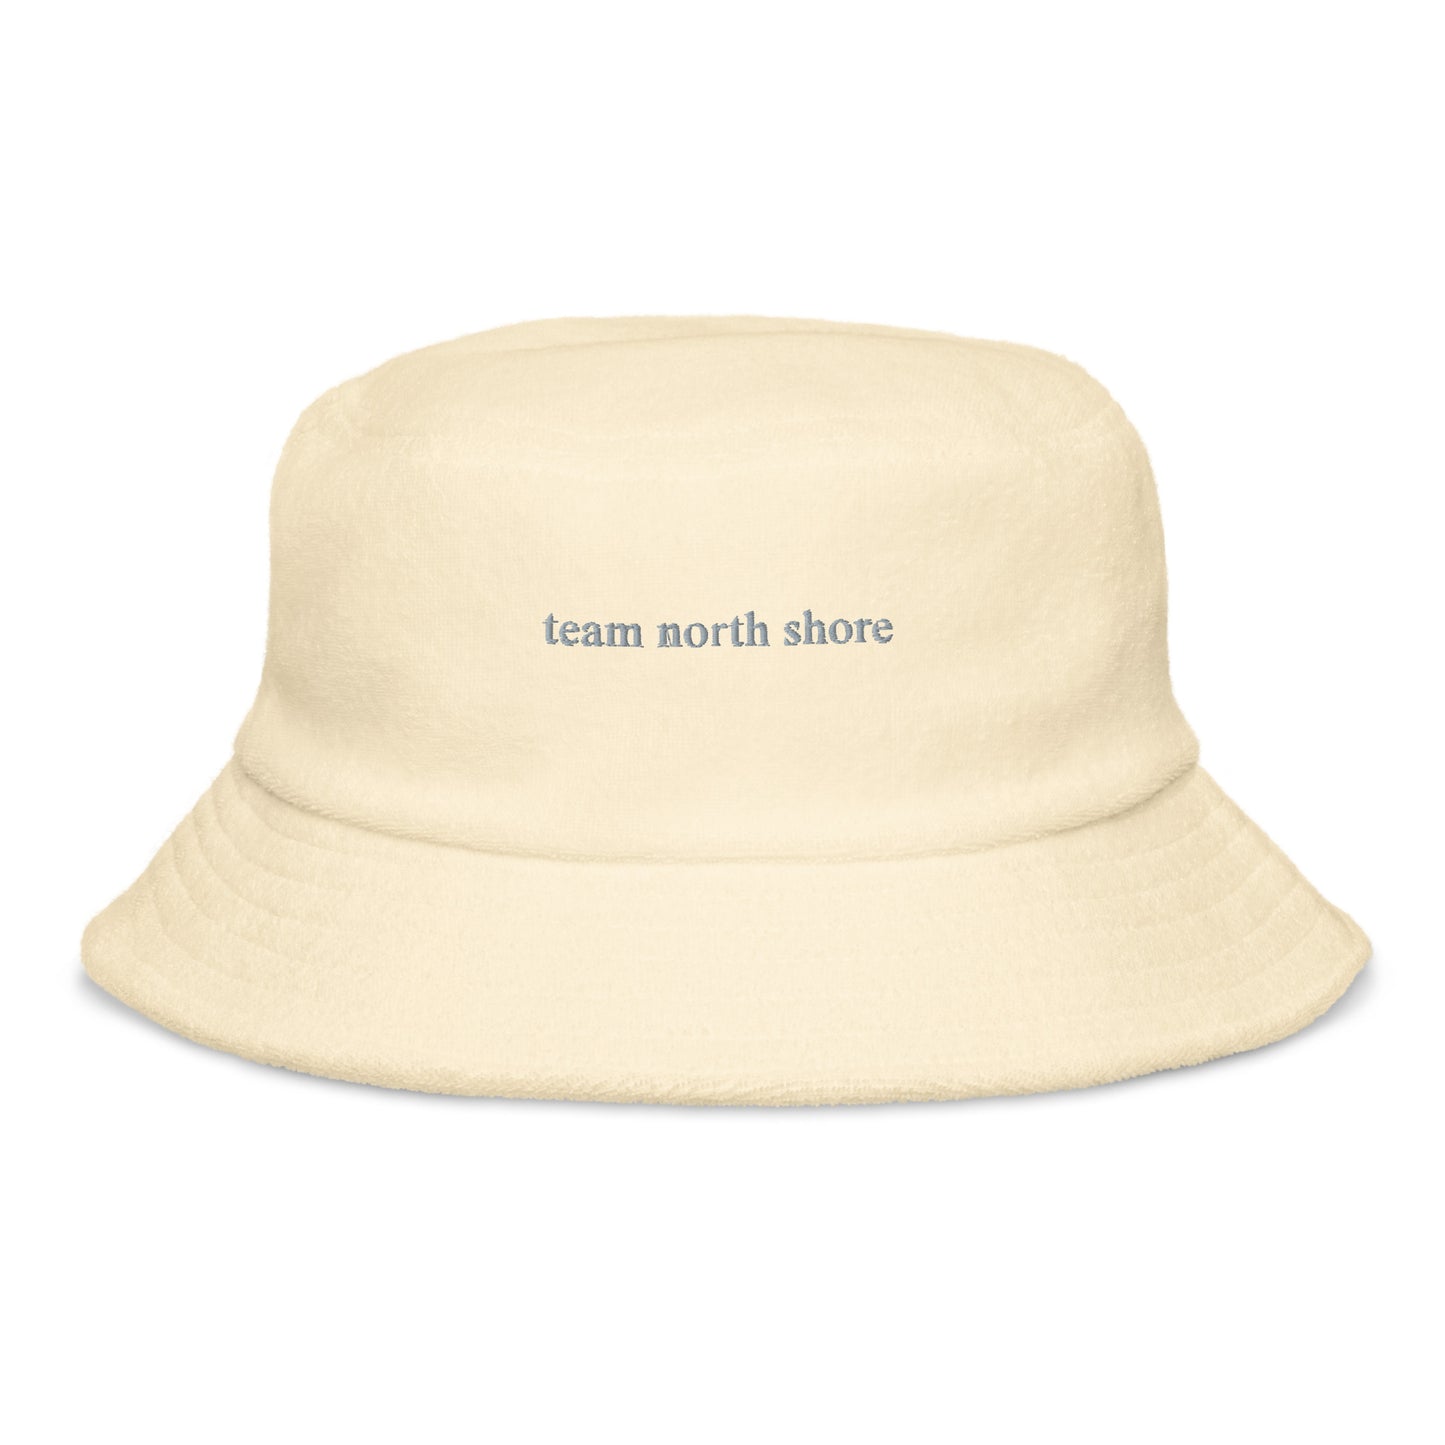 yellow bucket hat that says "team north shore" in grey lettering